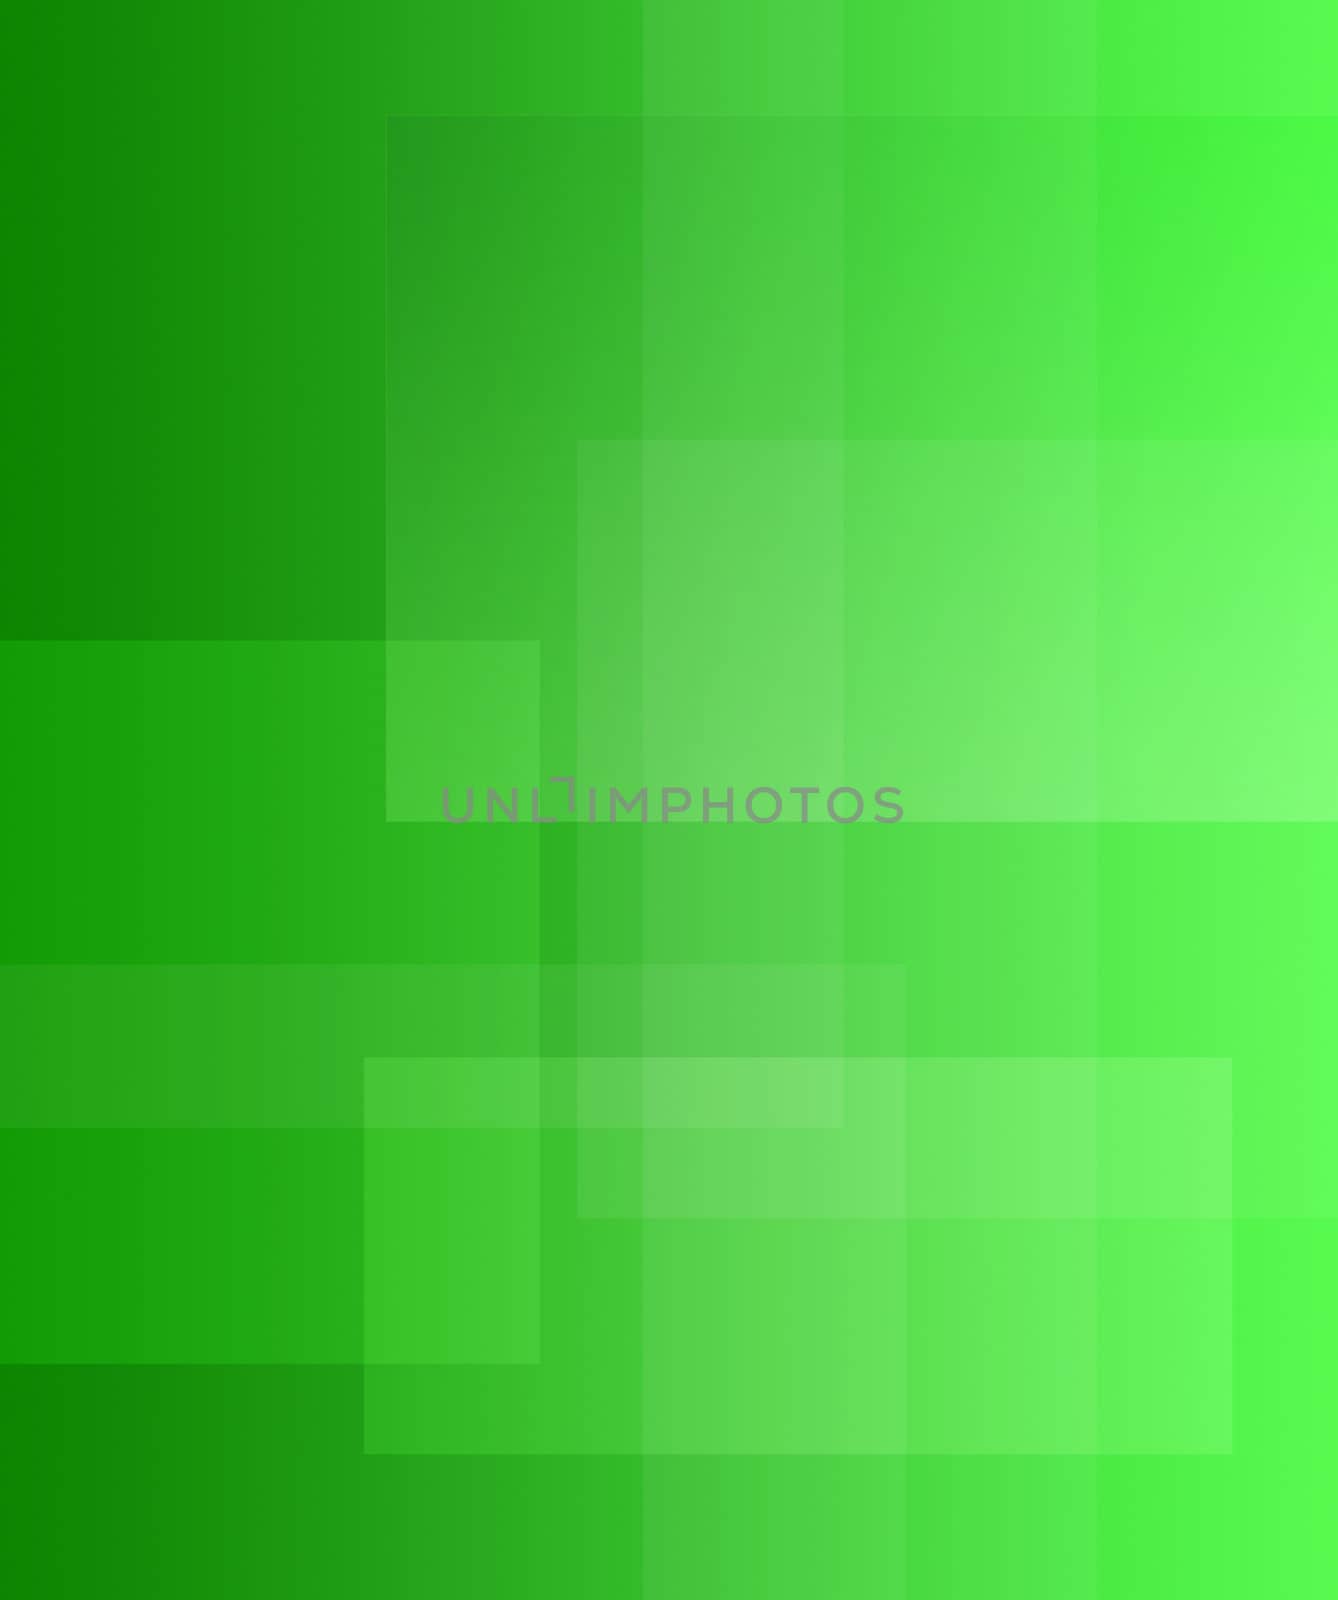 Computer designed abstract style background